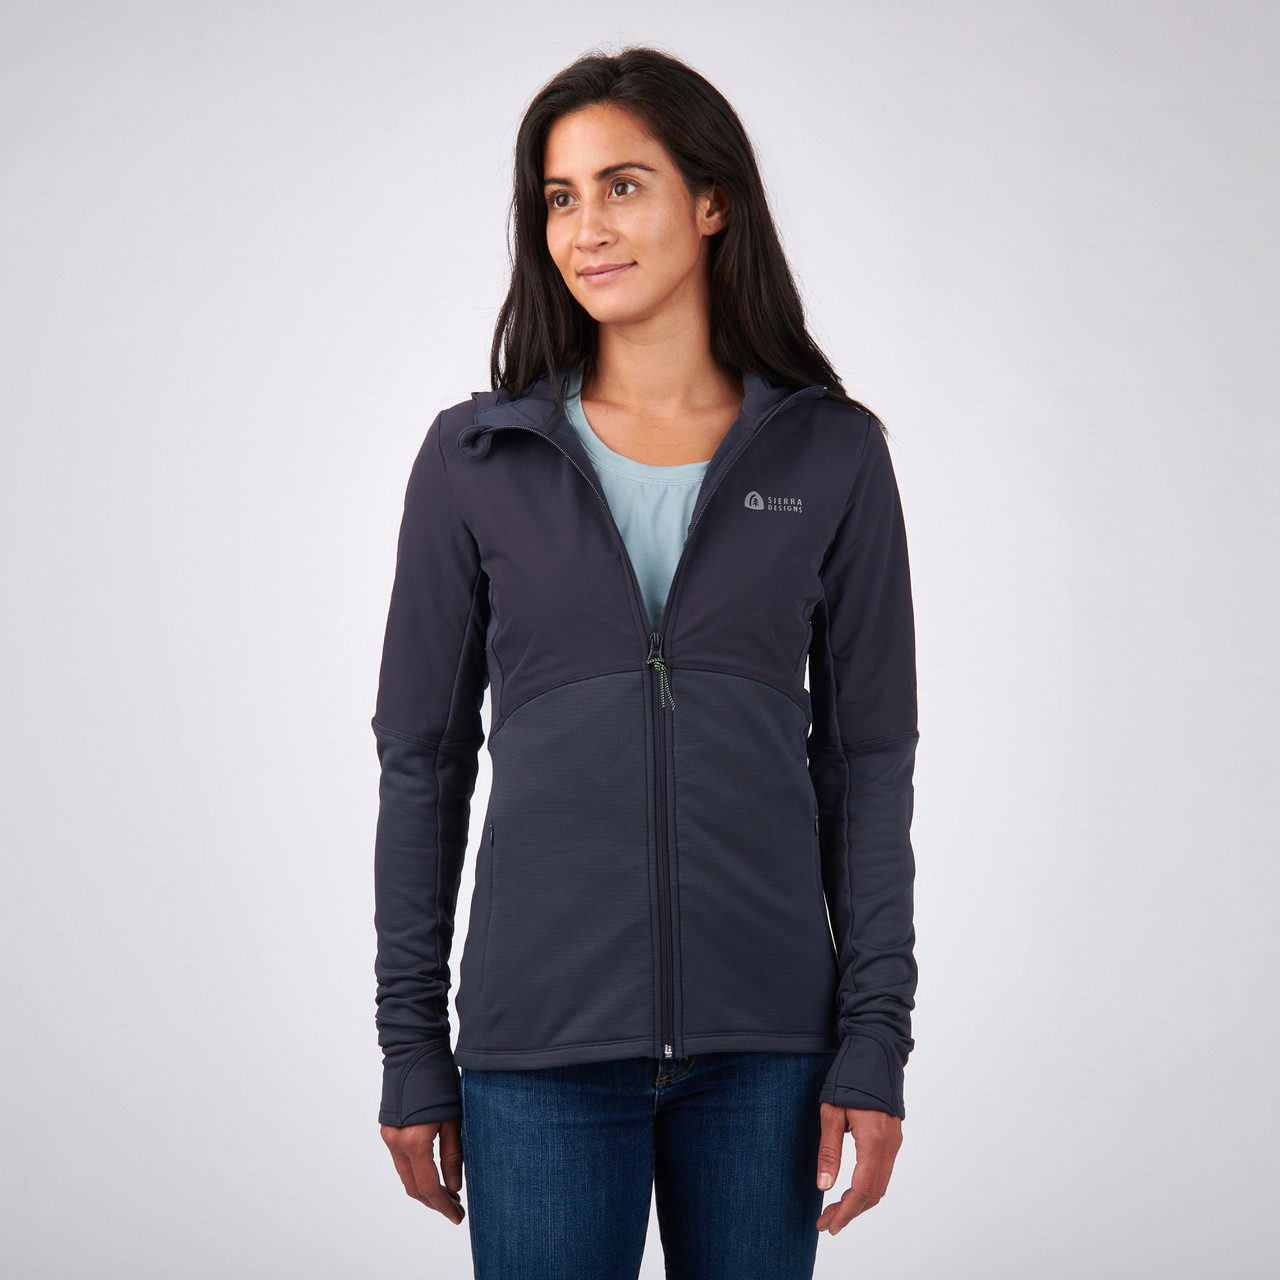 Sierra Designs Women's Cold Canyon Zip Hybrid Hoodie, Eclipse/Ombre Blue, front view